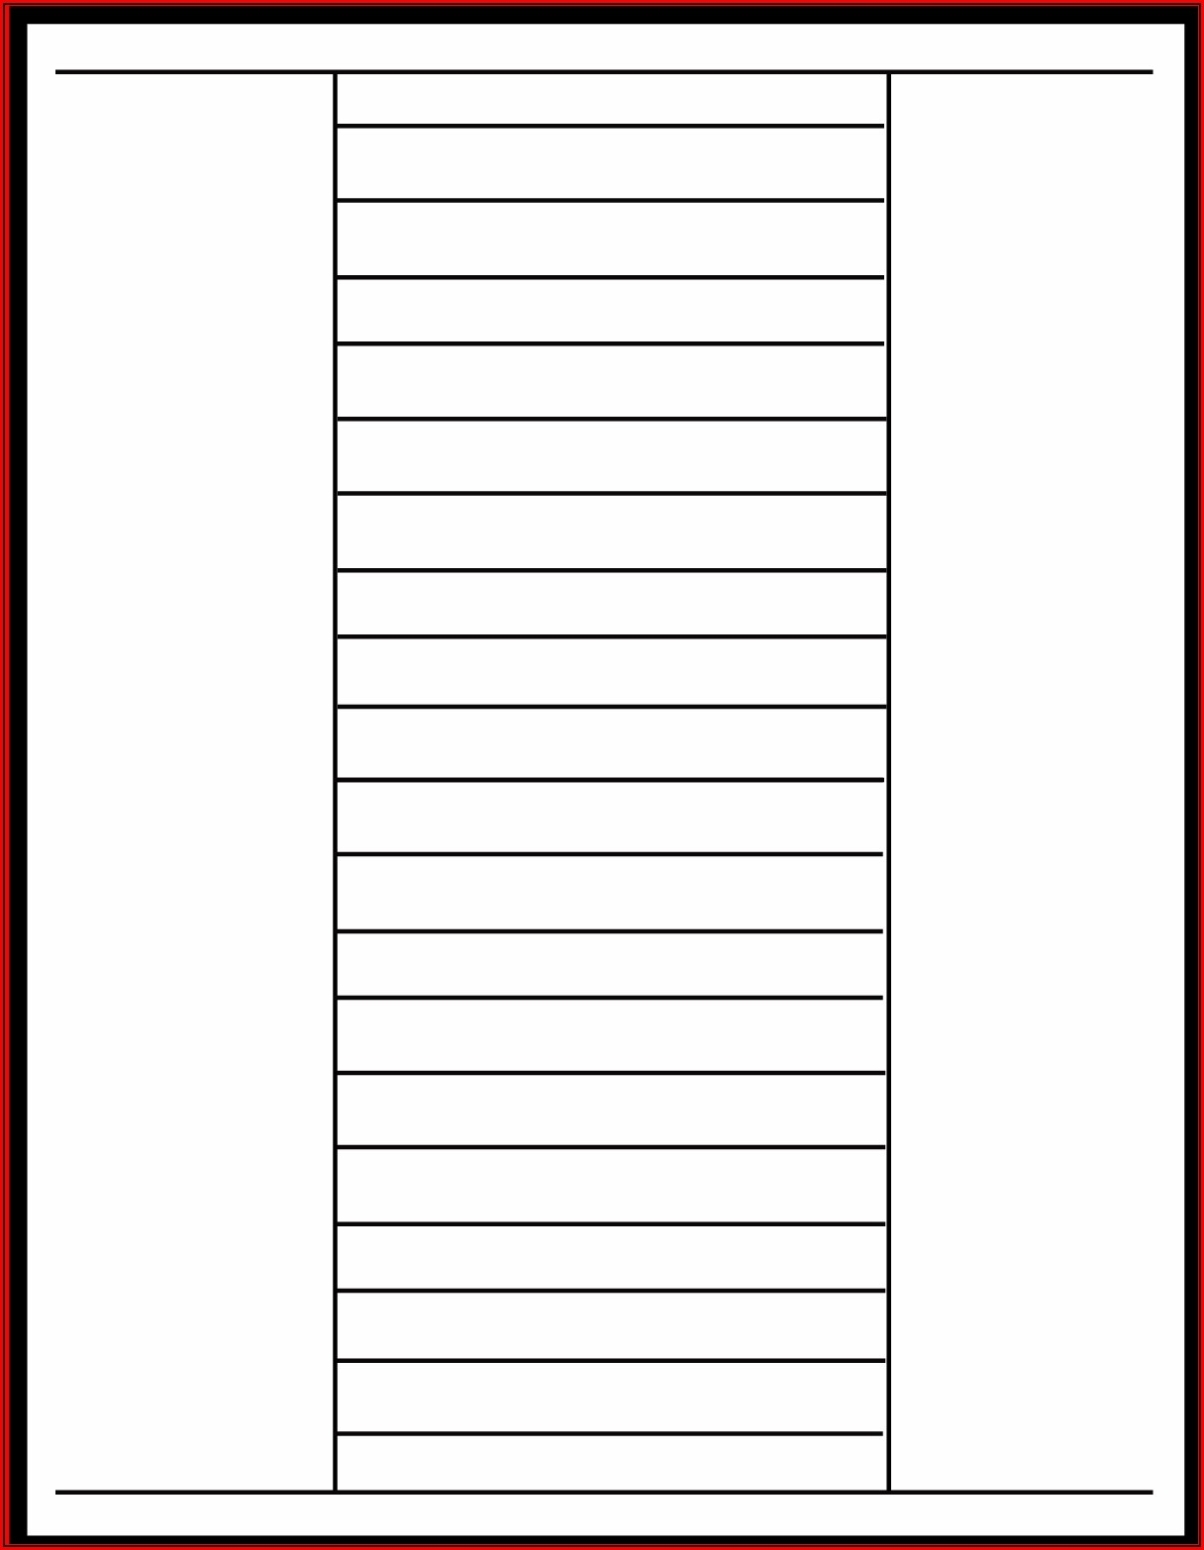 Staples 8 Tab Template Download - Avery™ Index Maker® Double-Column for Staples Label Templates